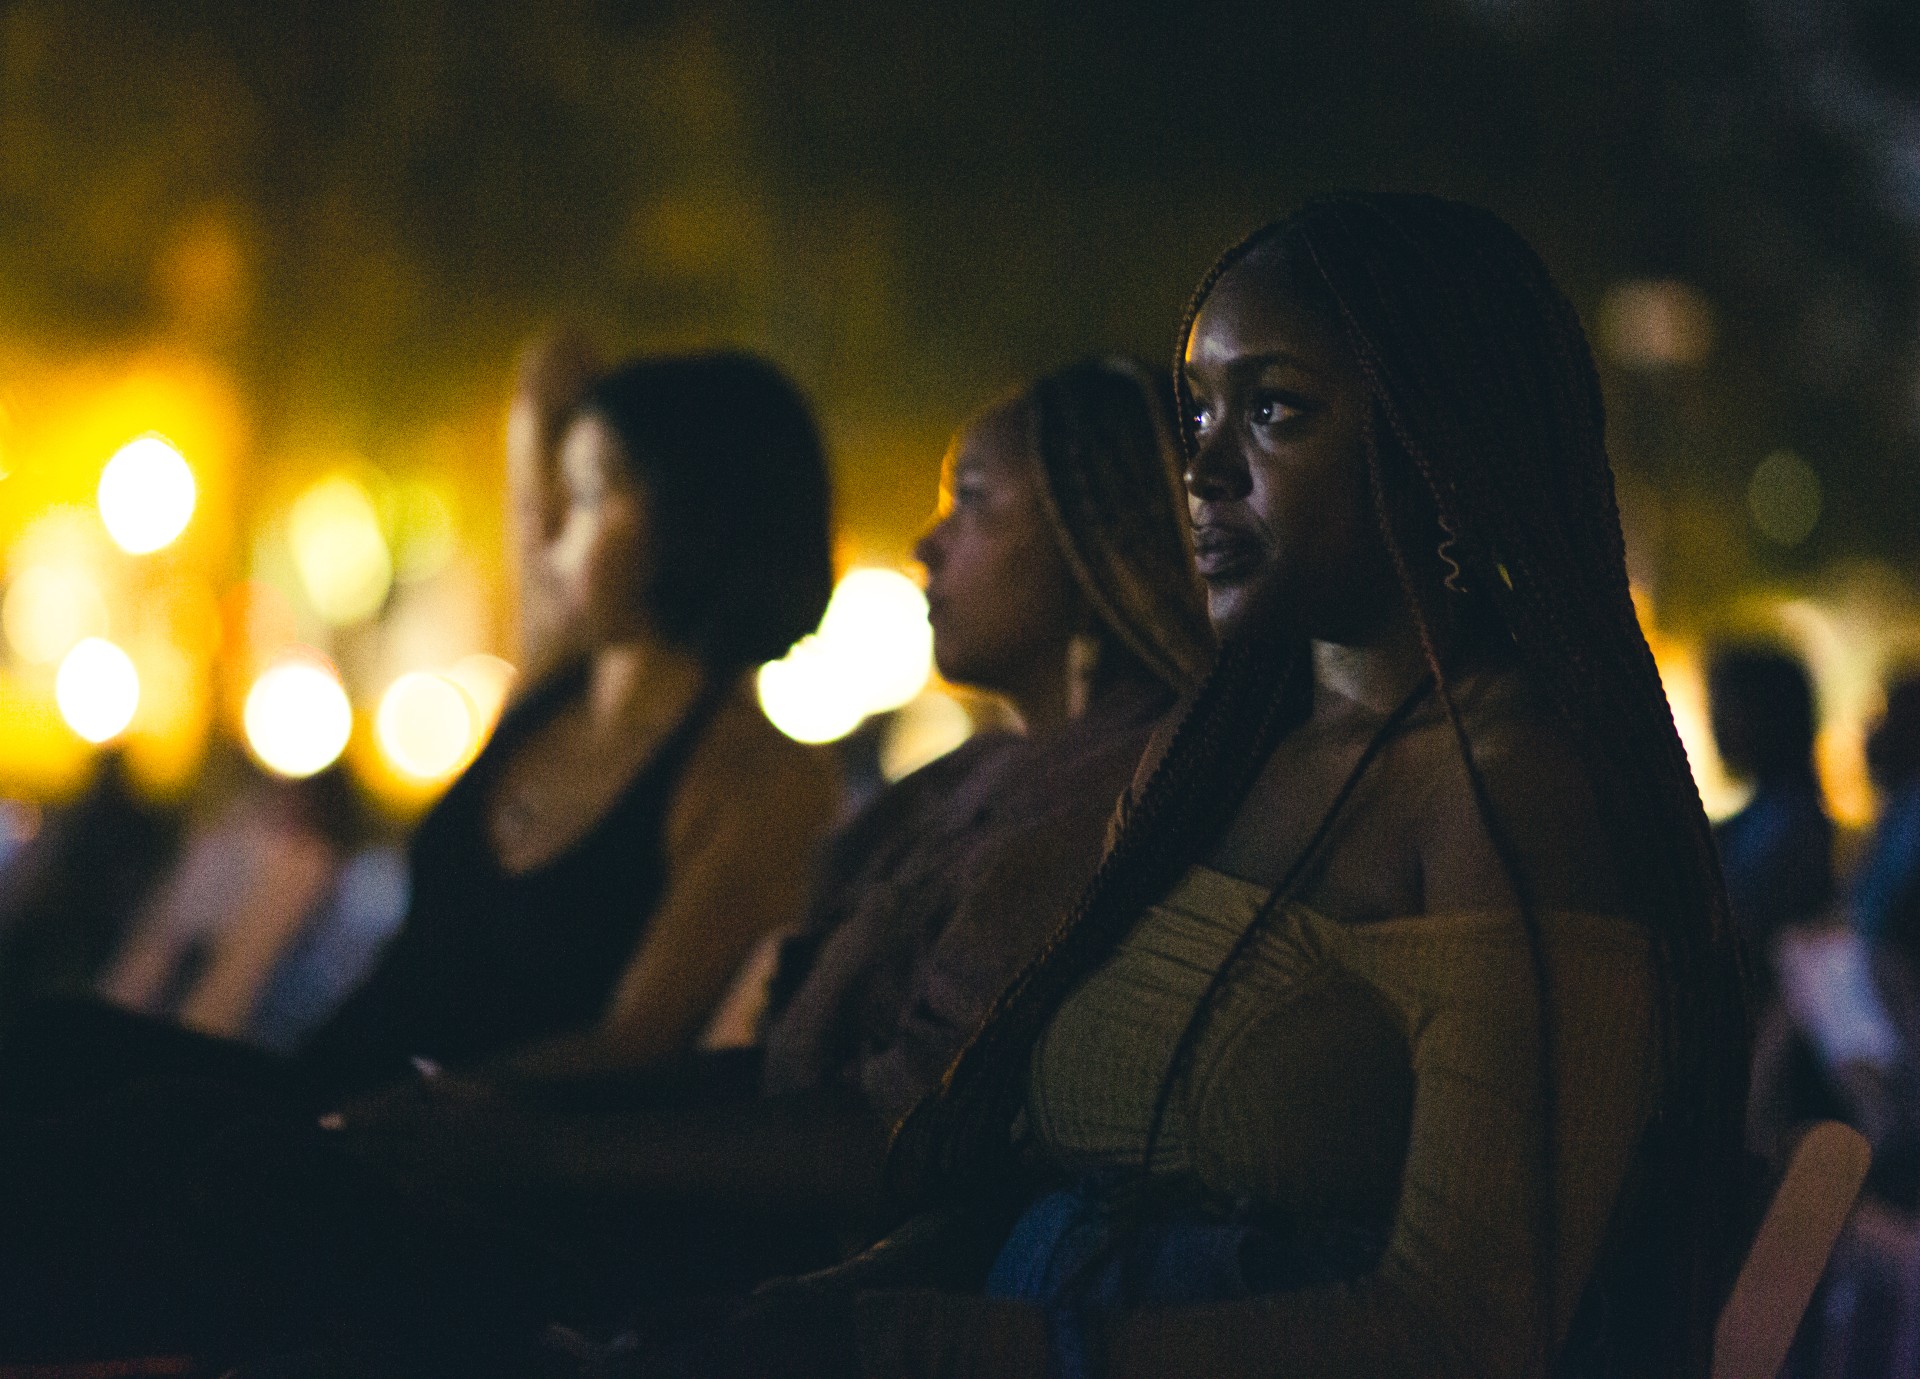 A nightime photo of the audience during an outdoor film screening focuses on three people, the one in the foreground in focus, who is a Black person with long hair.